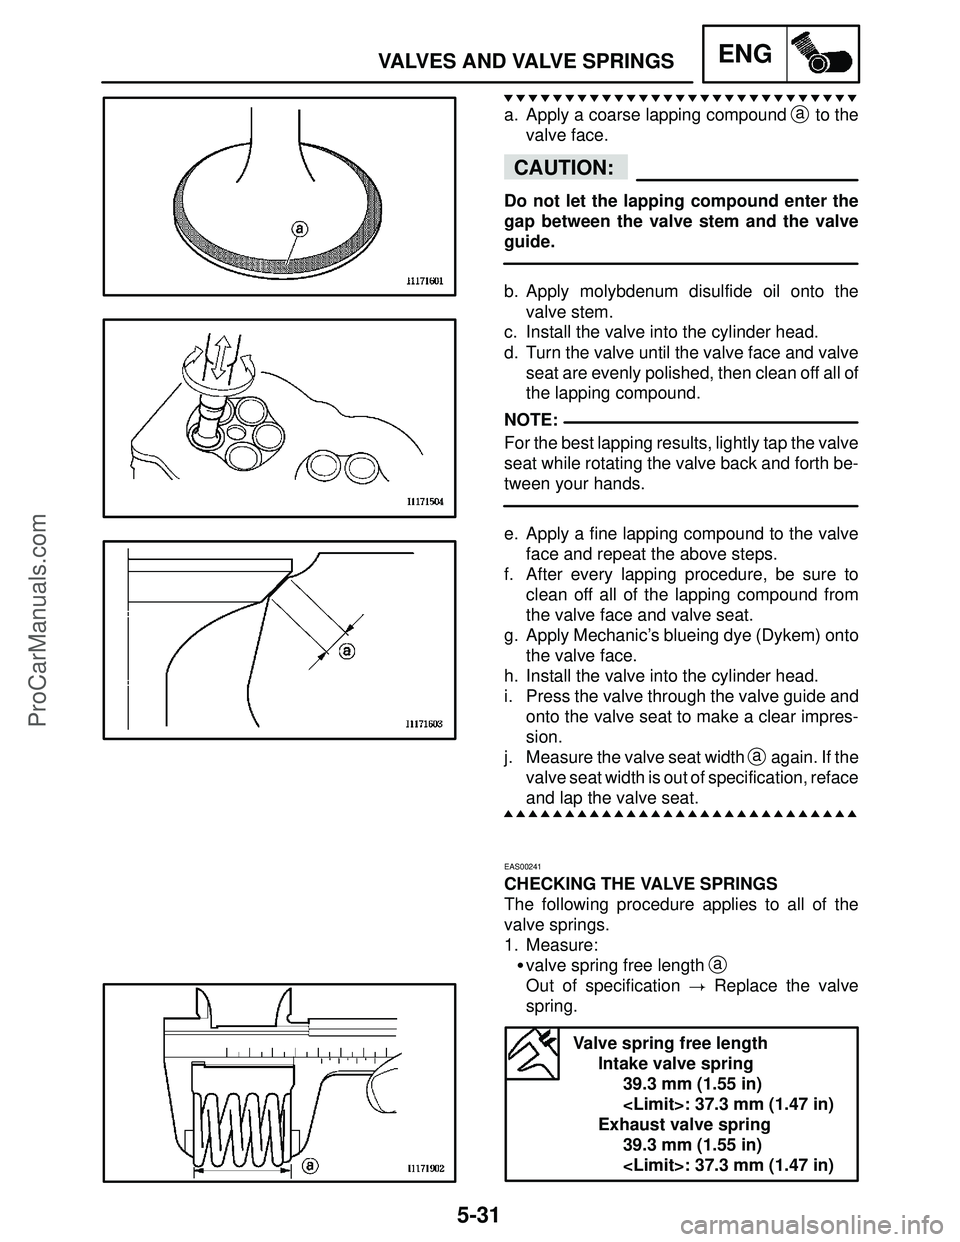 YAMAHA YZF-R1S 2004  Service Manual 5-31
VALVES AND VALVE SPRINGSENG
CAUTION:
NOTE:
a. Apply a coarse lapping compound a to the
valve face.
Do not let the lapping compound enter the
gap between the valve stem and the valve
guide.
b. App